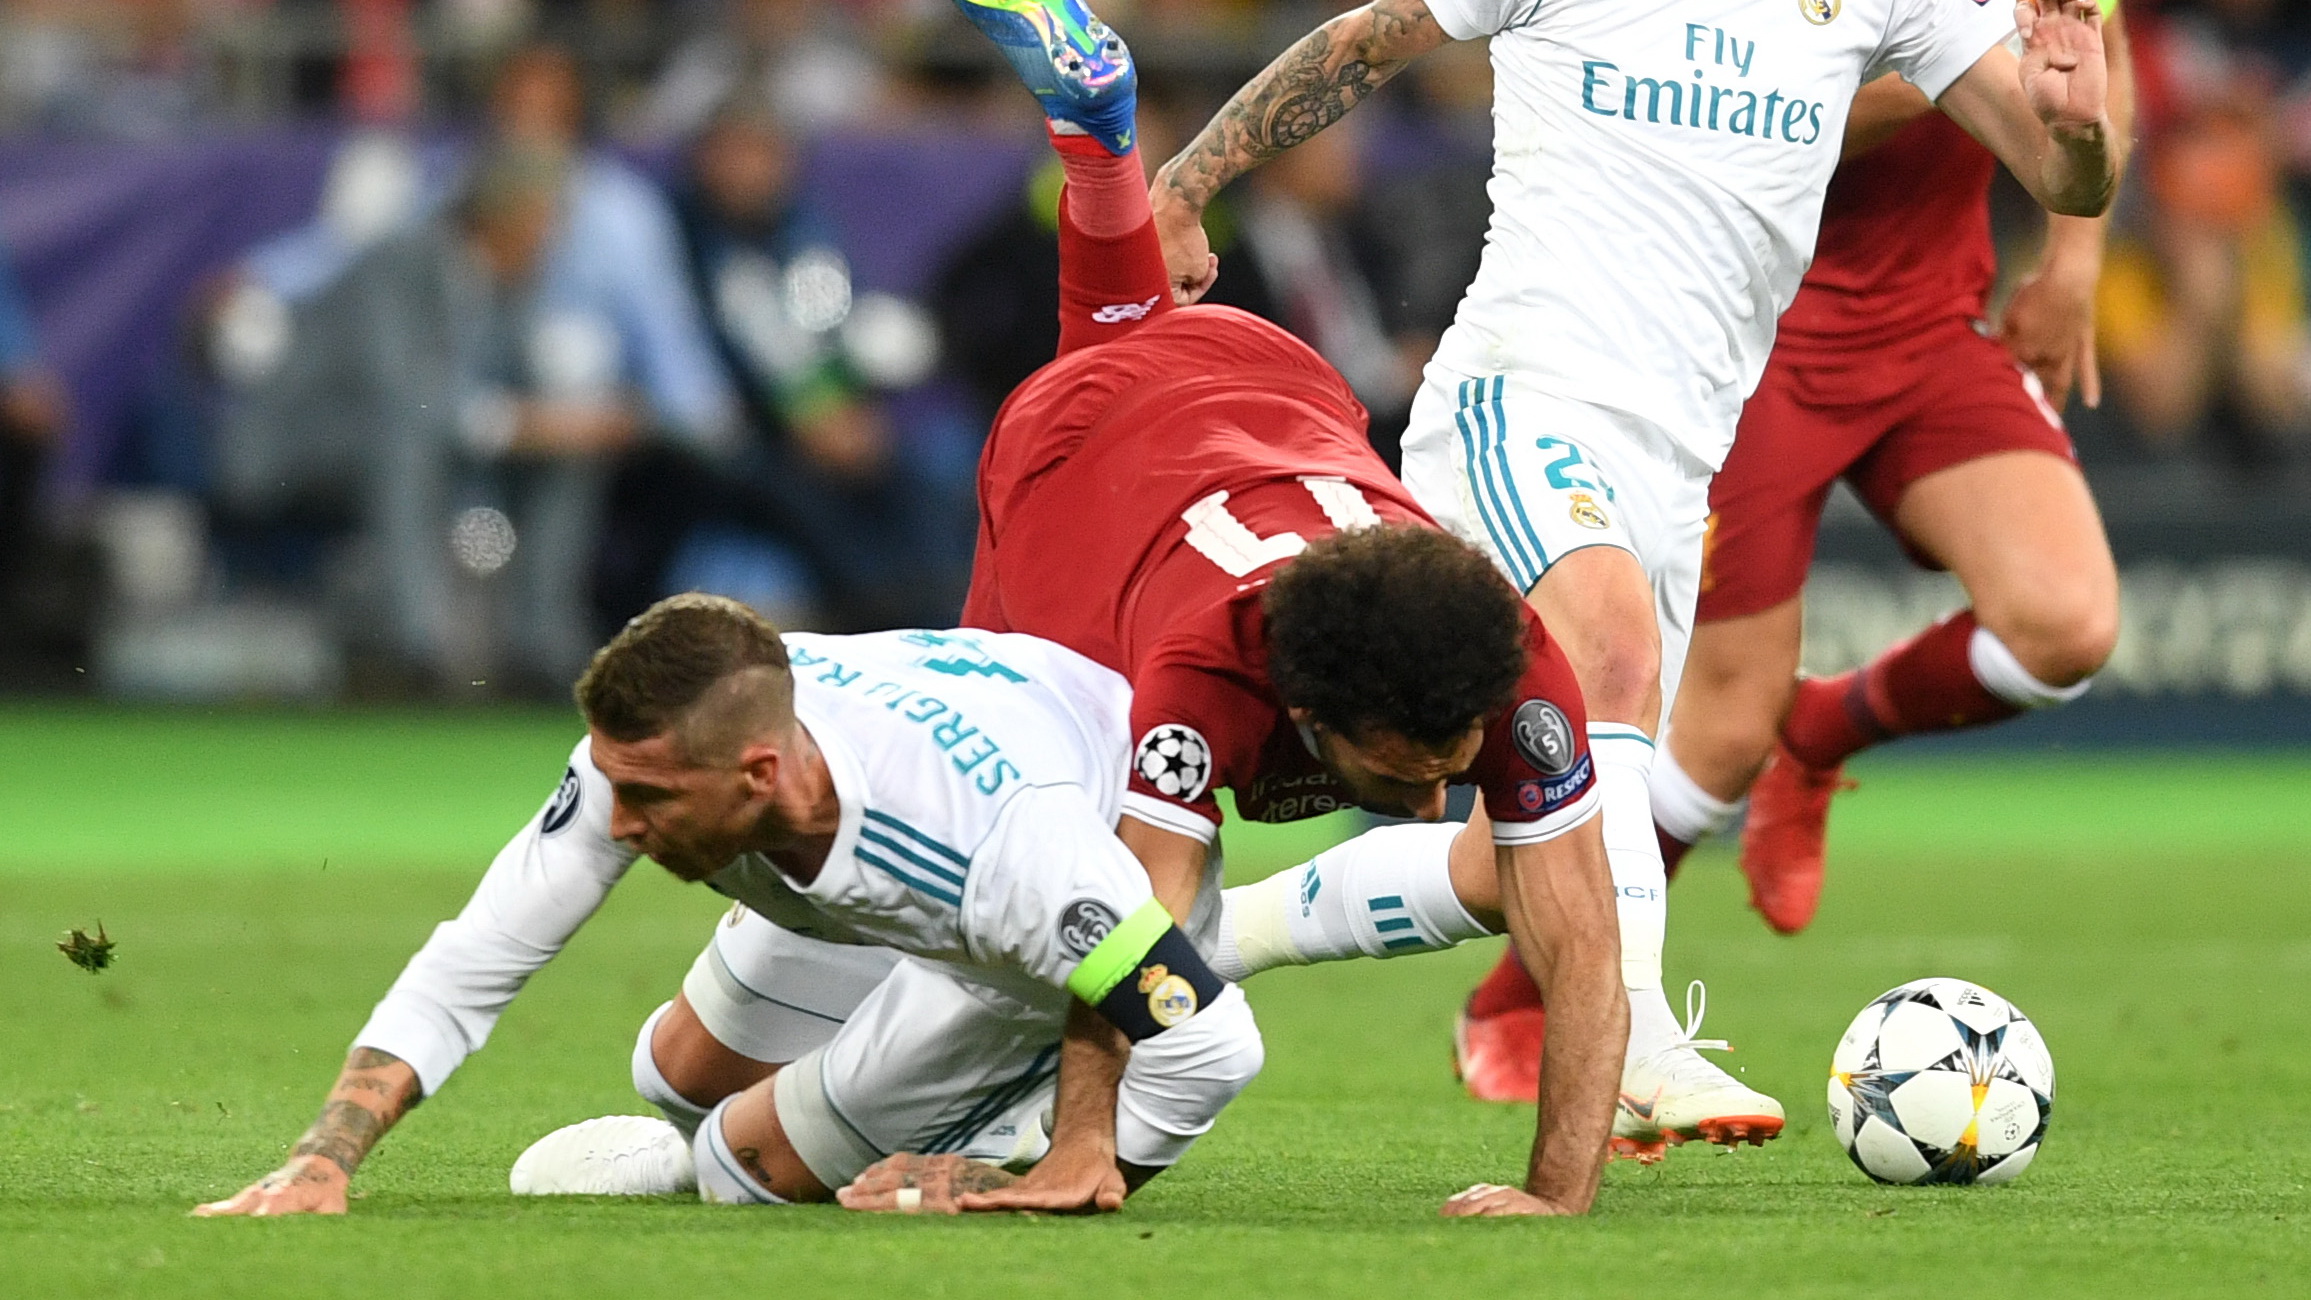 sergio-ramos-real-madrid-mohamed-salah-liverpool-champions-league-2018_16tiou1g6e84a1tyw2q38954ih